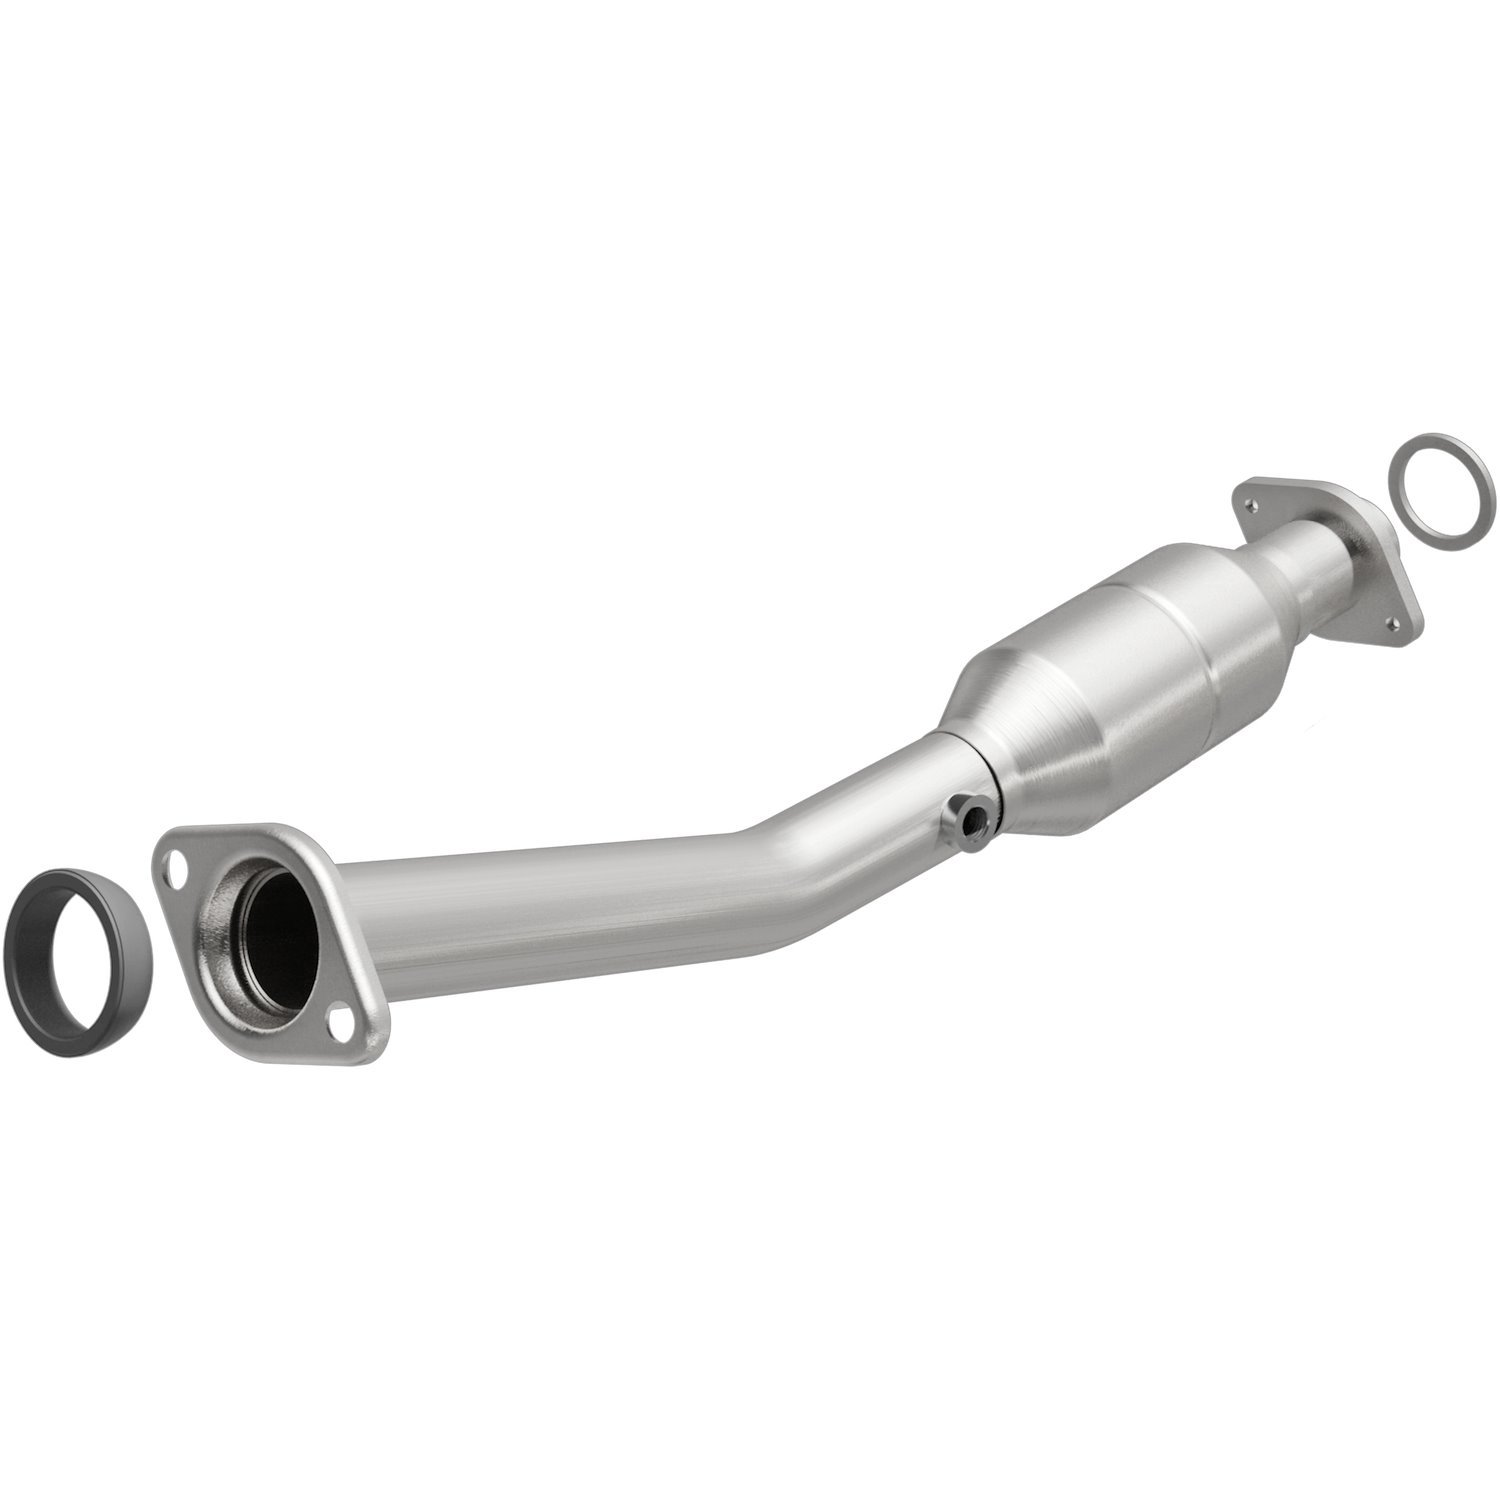 2011-2015 Nissan Juke California Grade CARB Compliant Direct-Fit Catalytic Converter